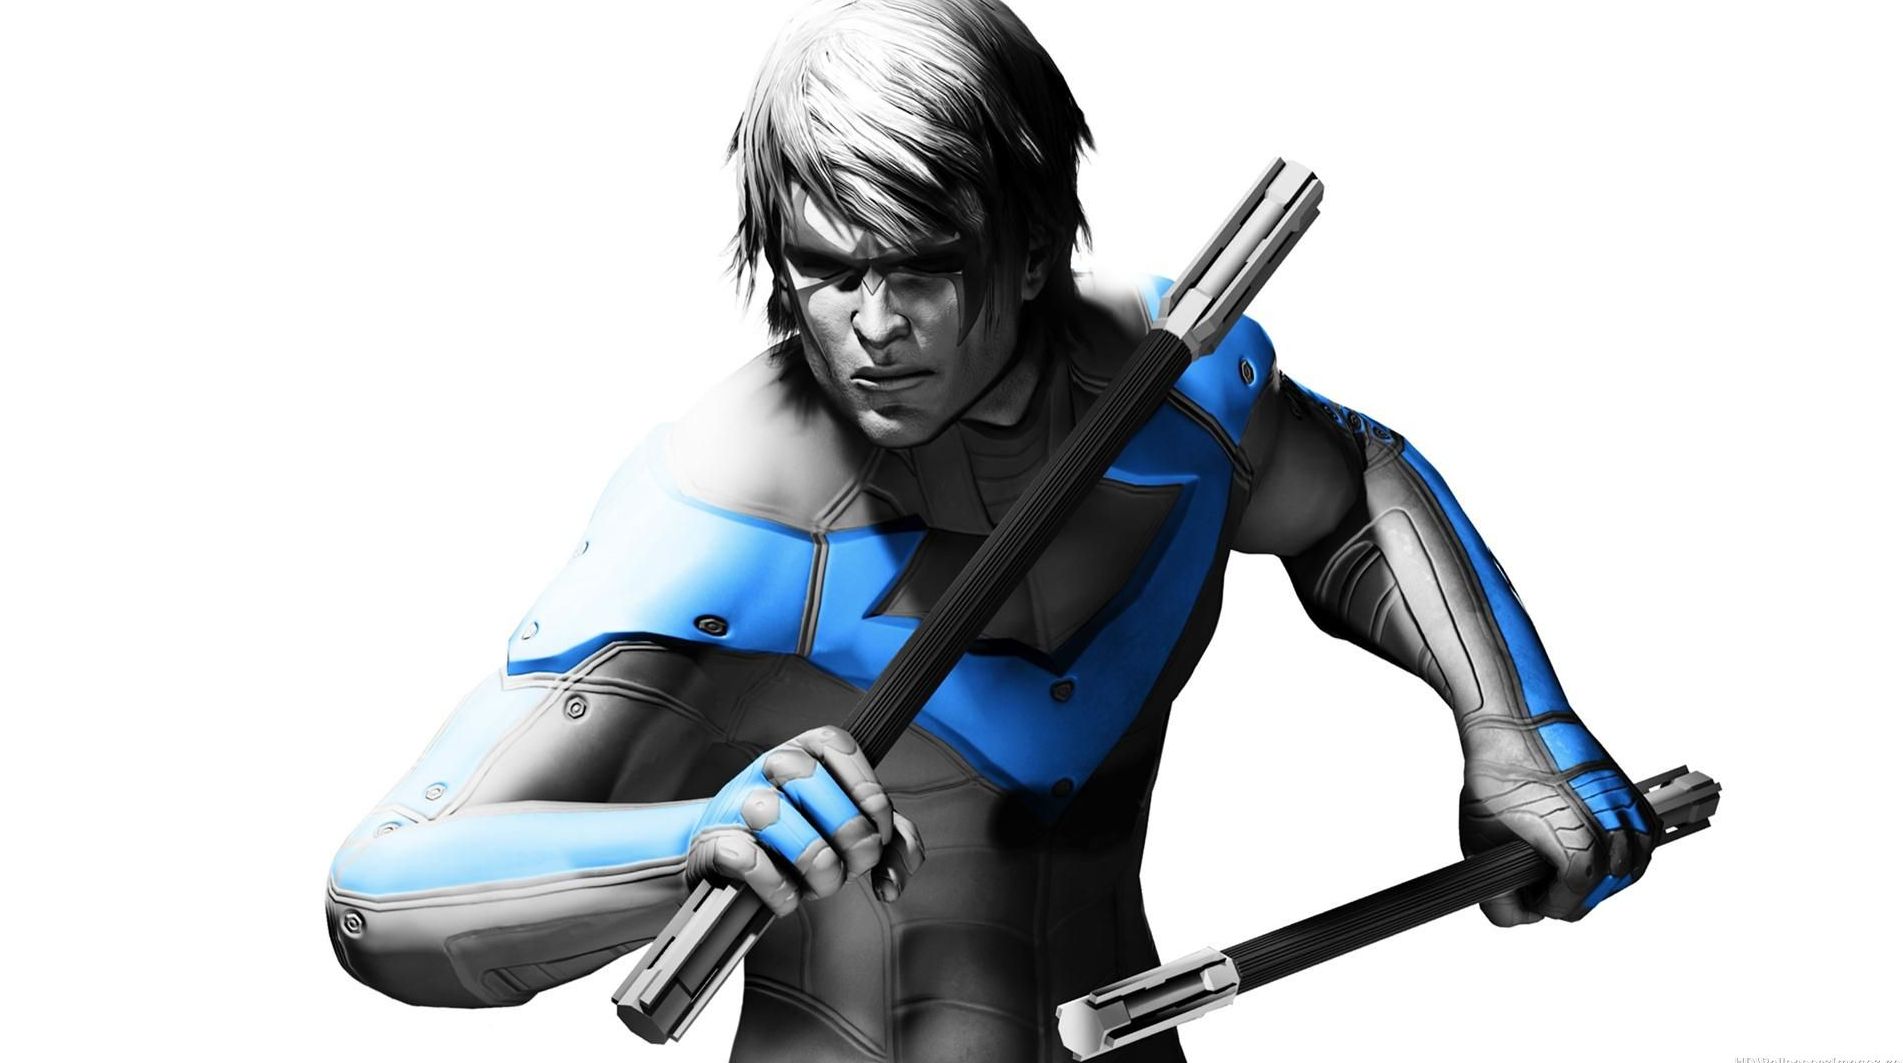 Nightwing, as seen in the Arkham game franchise